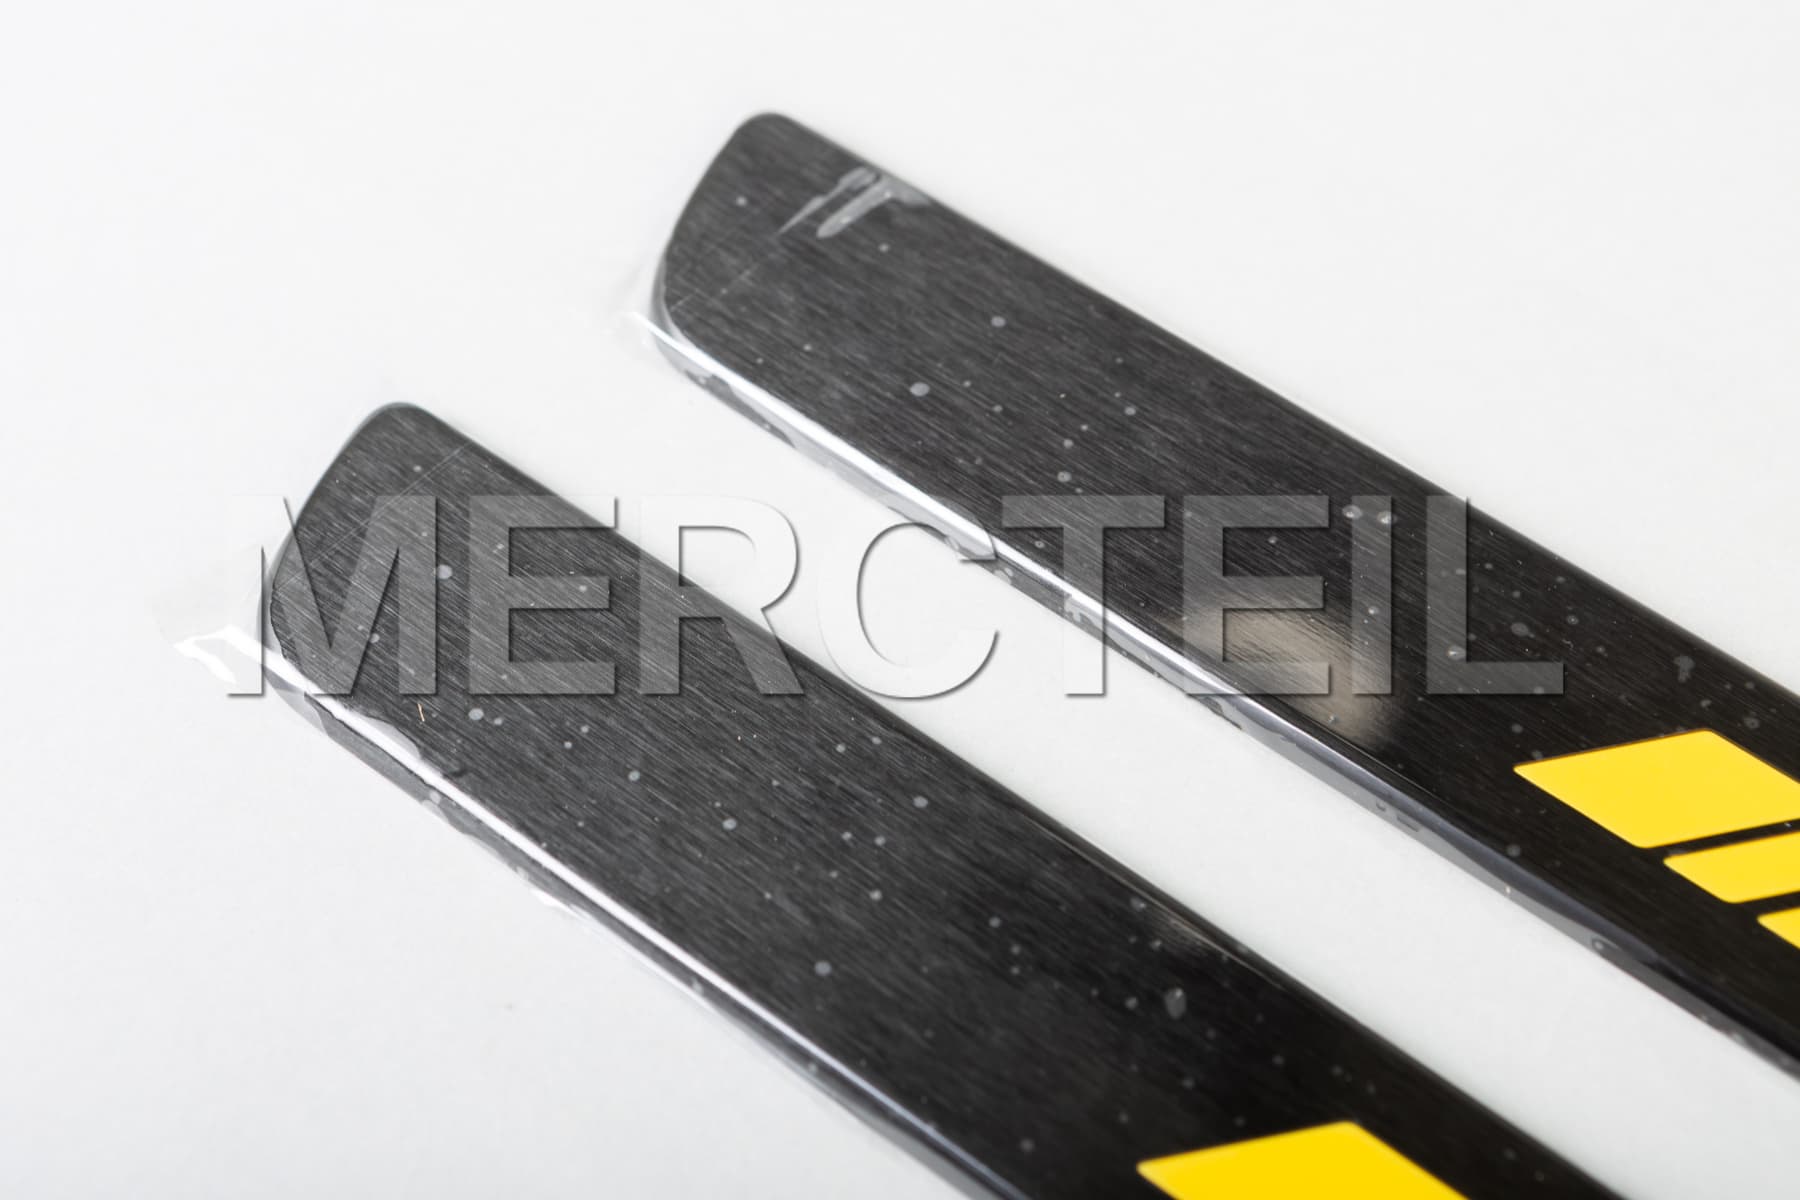 Exchangeable AMG Black & Yellow Covers for Illuminated Door Sills Genuine Mercedes AMG (part number: A1776804607)